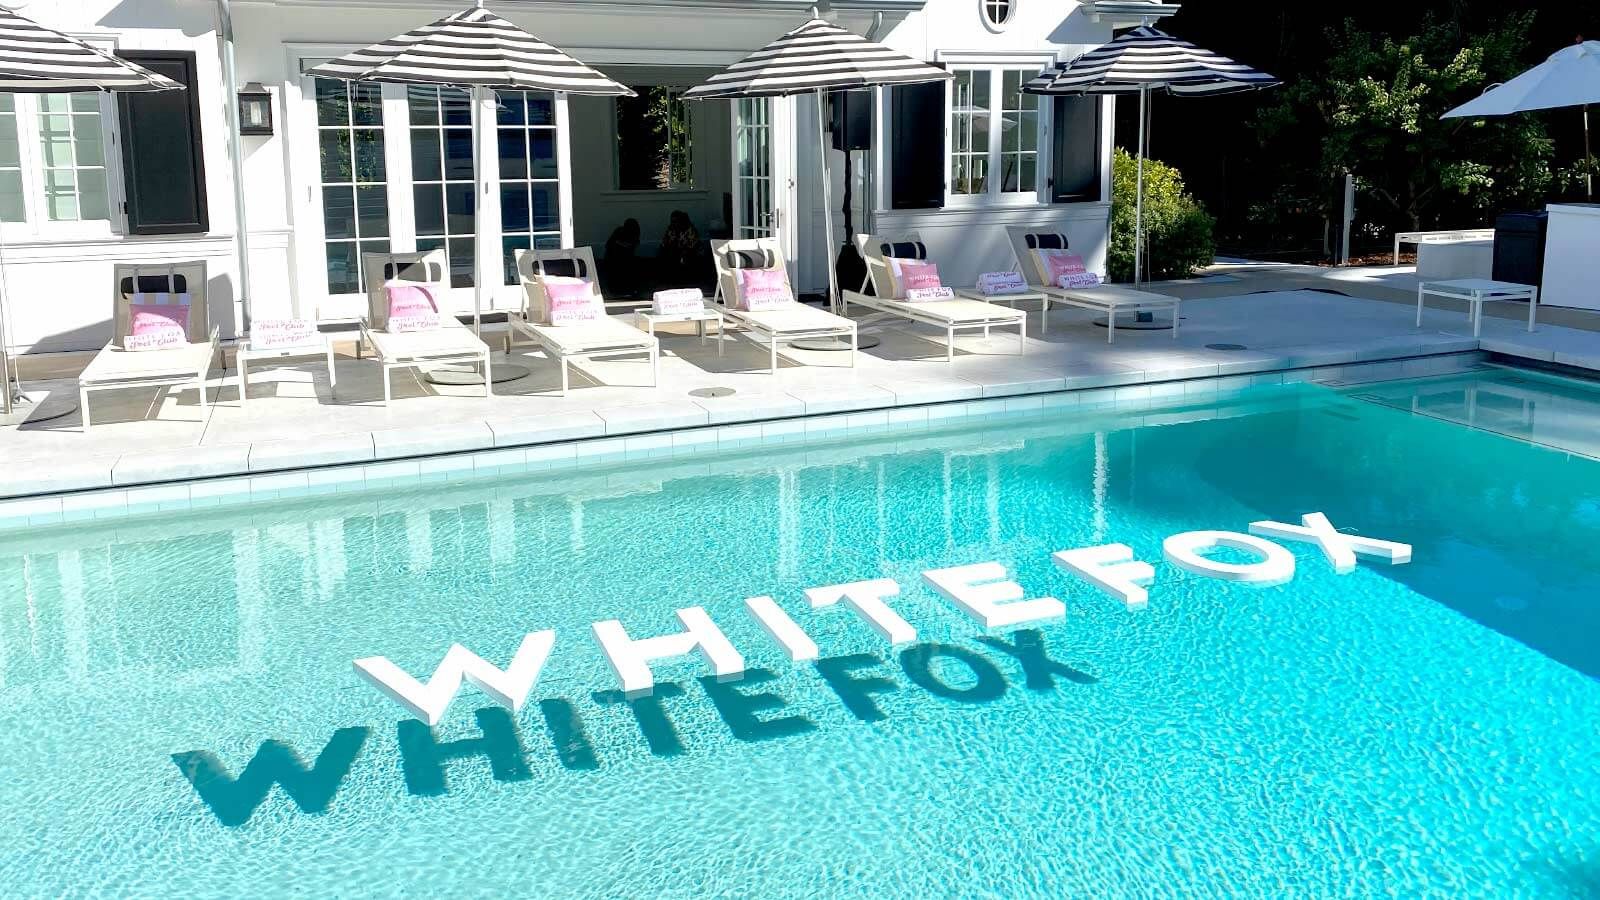 White Fox outdoor sign for pool decoration